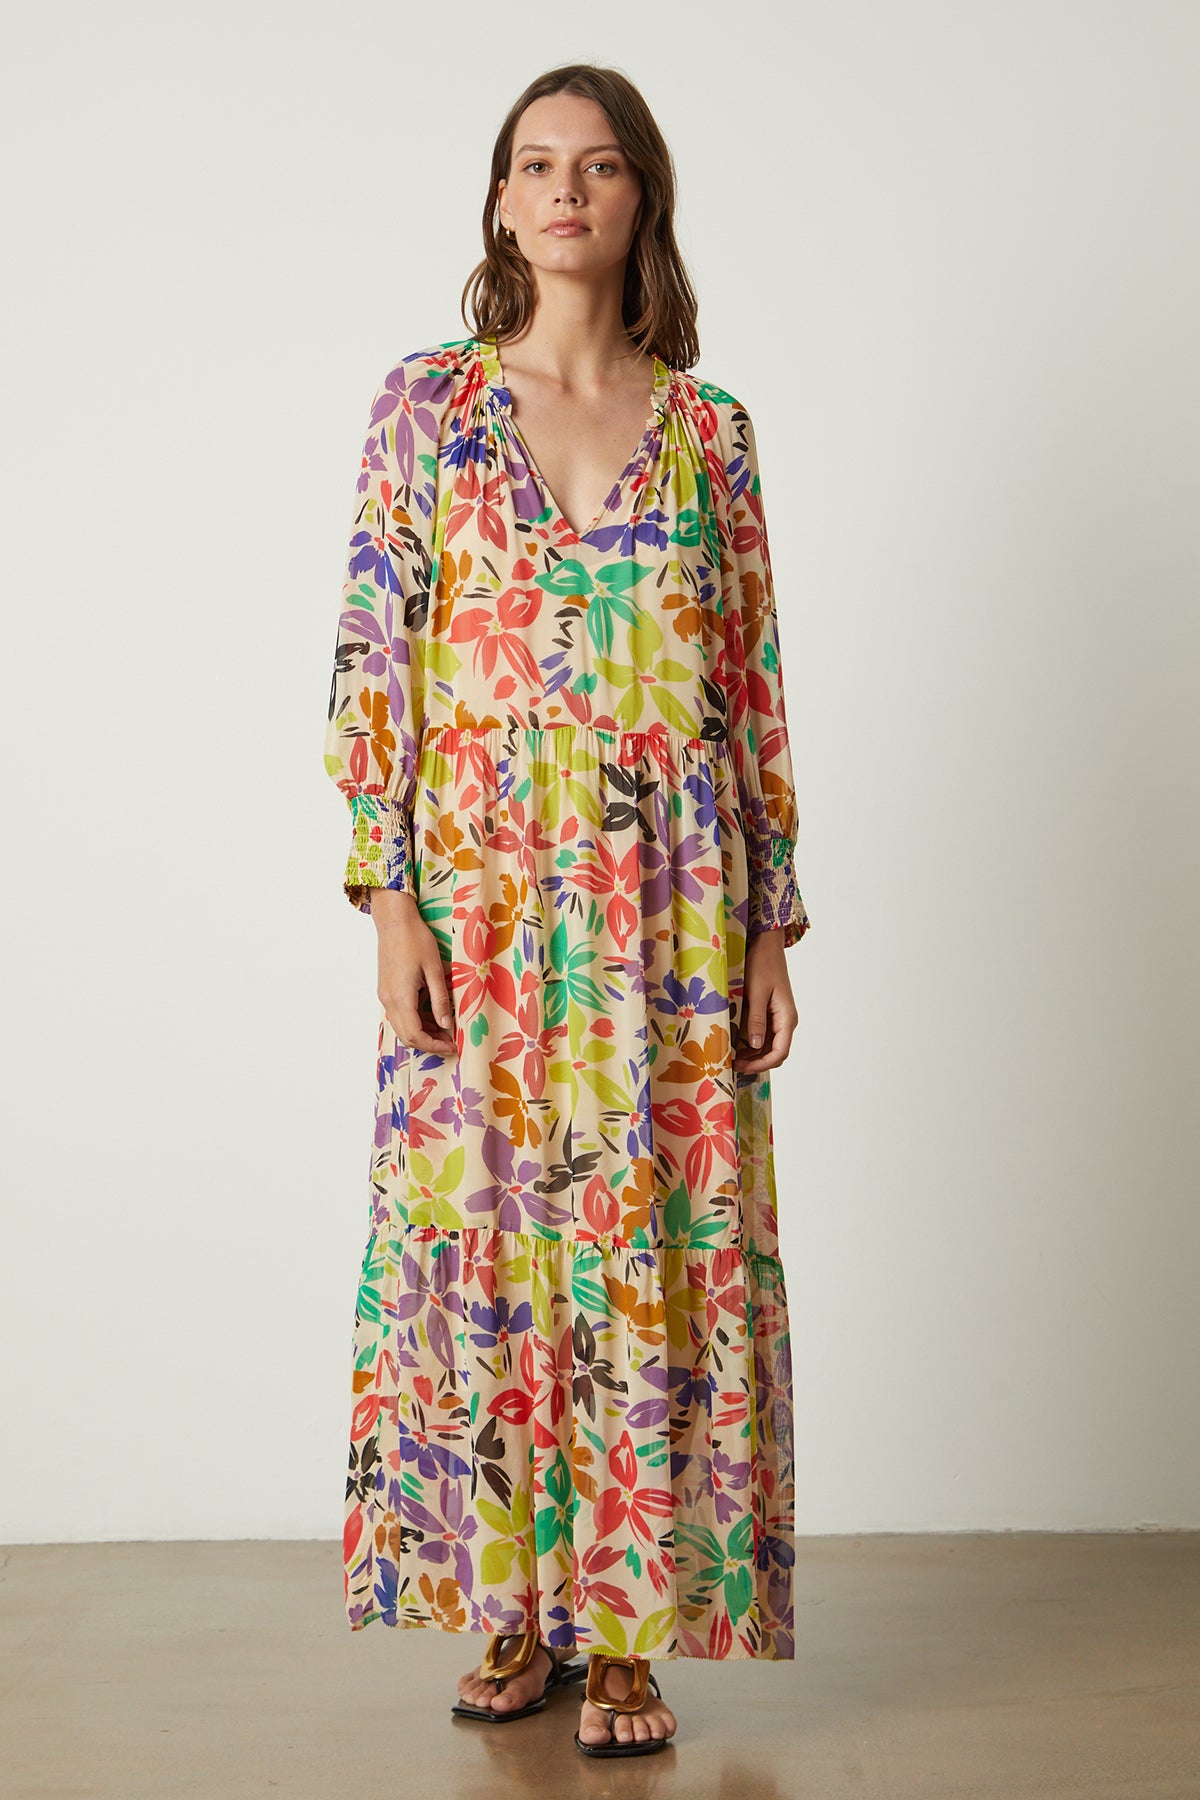   A woman wearing a SERENA PRINTED MAXI DRESS by Velvet by Graham & Spencer. 